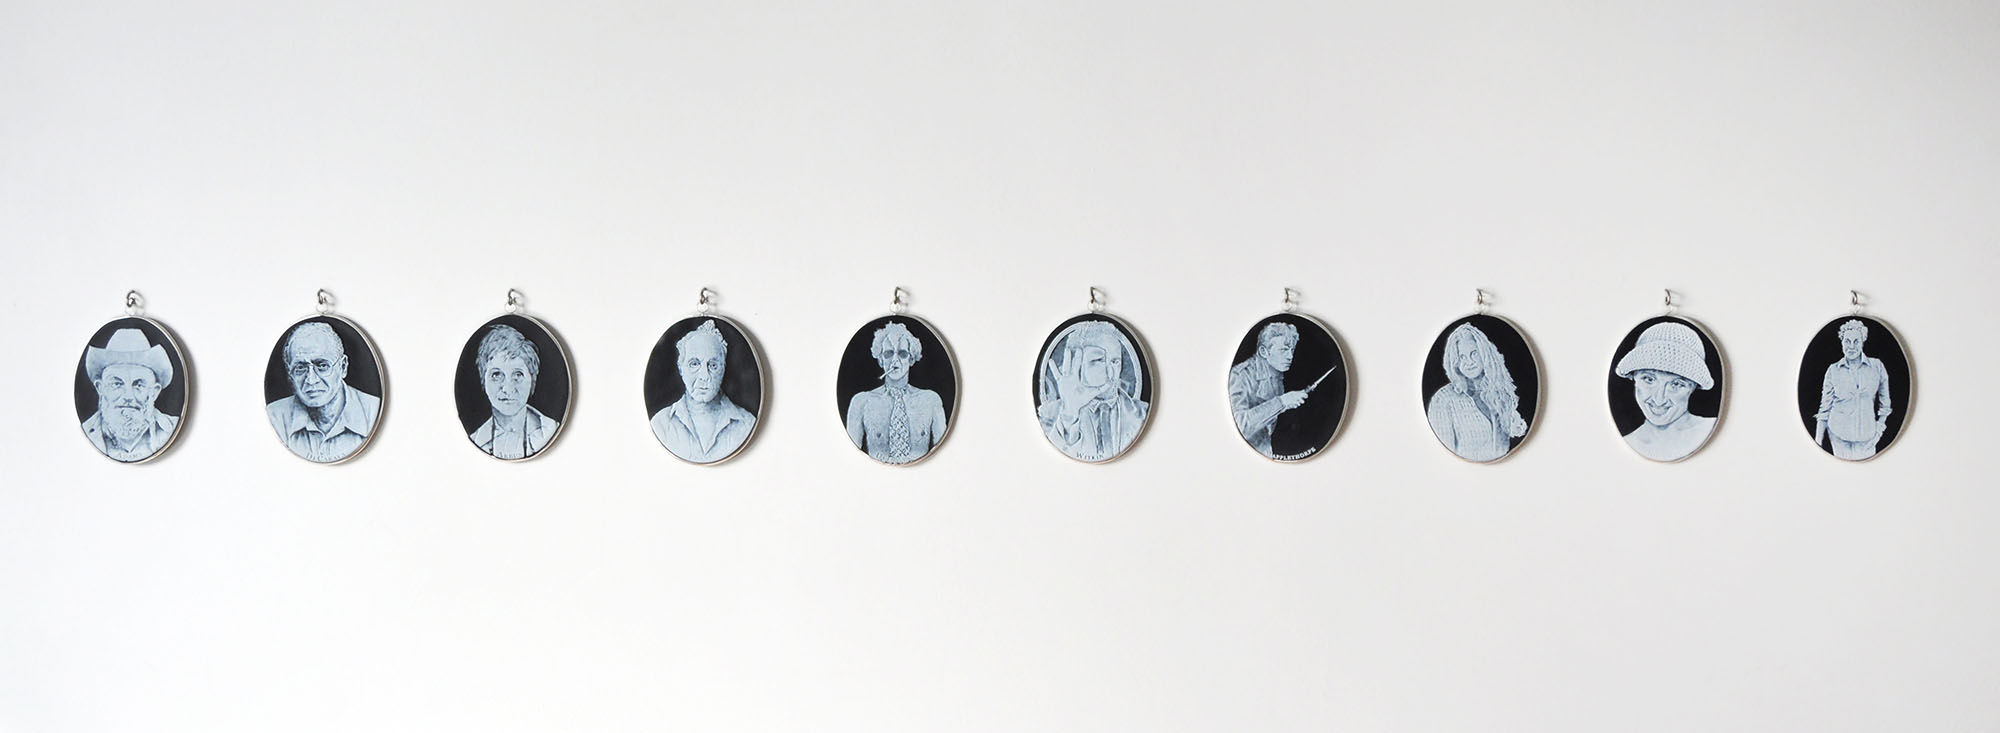 Charlotte Potter - Cameographic (installation view of 10 cameos), 2017, hand engraved glass, silver, tin, stainless steel, 5 by 4 inches each cameo, dimensions variable